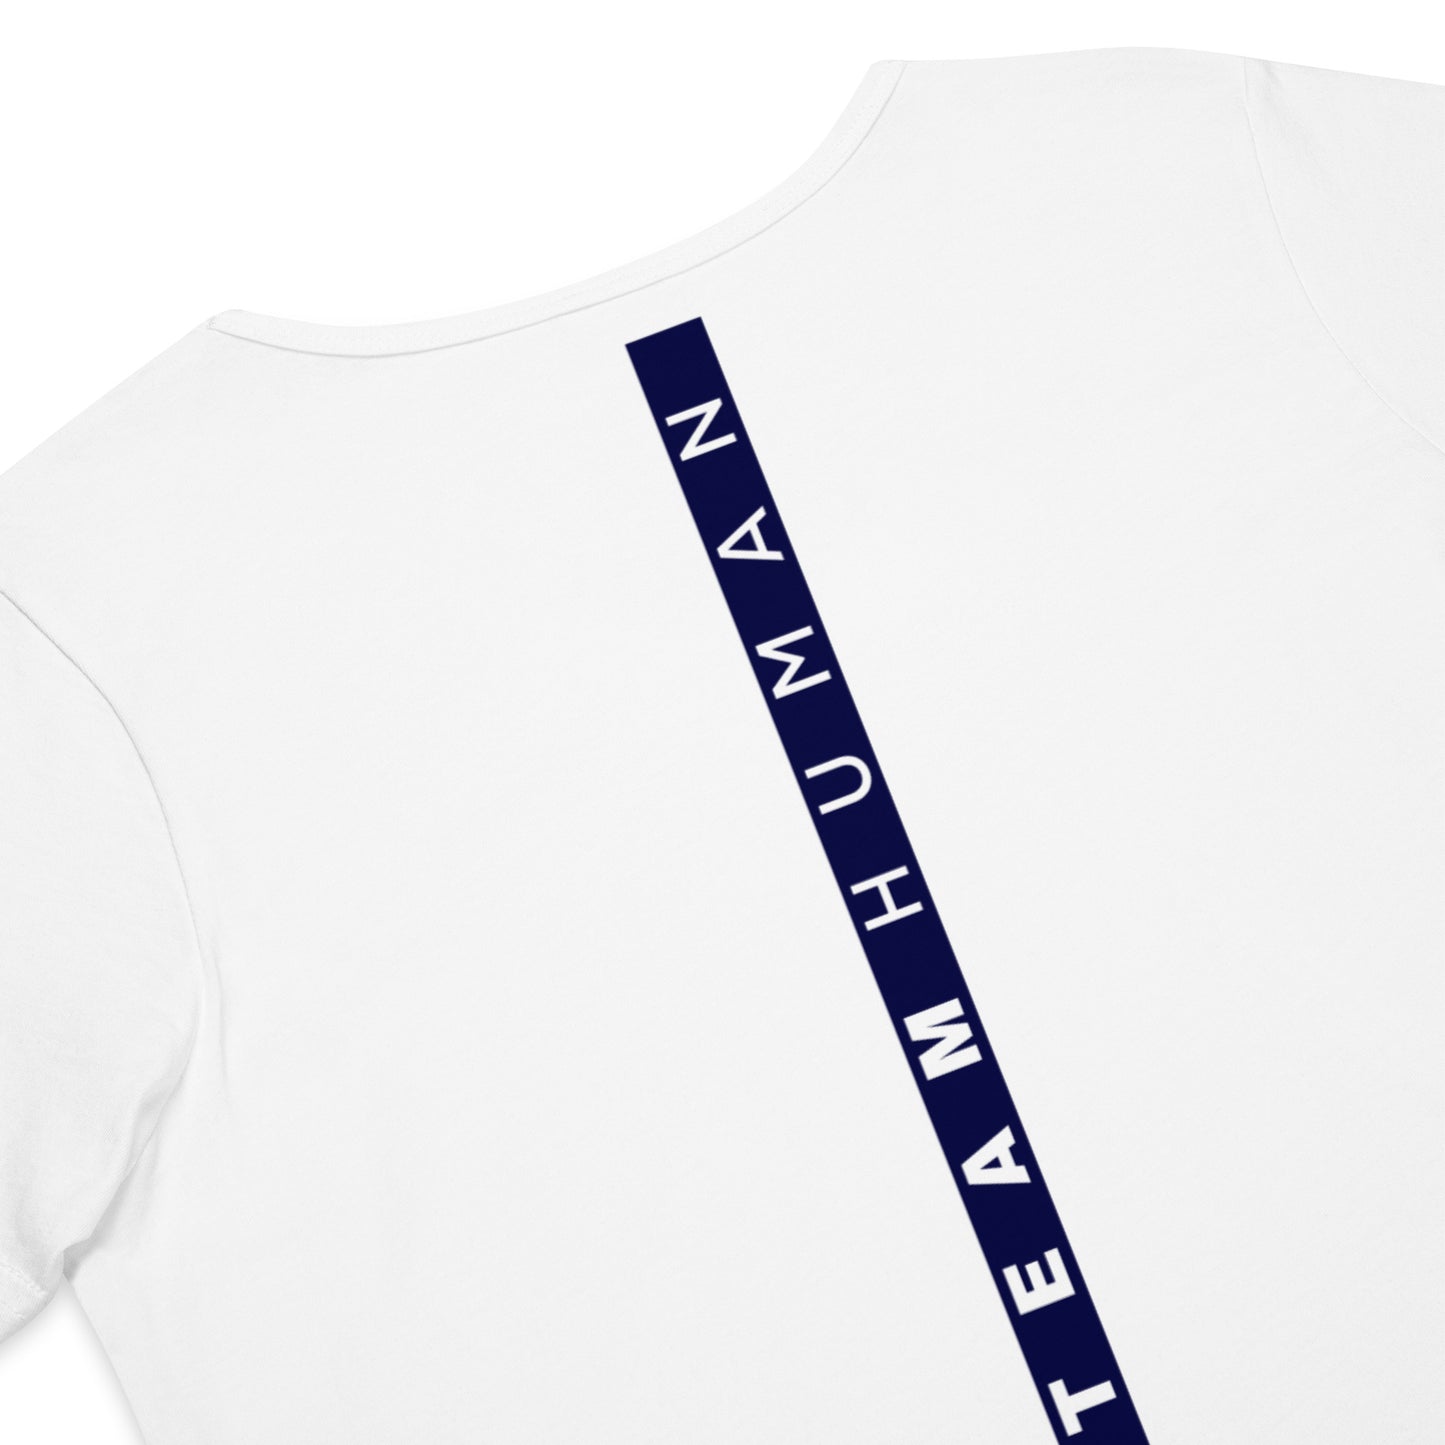 The Women’s Round Neck Tee (White+Navy Special Edition)